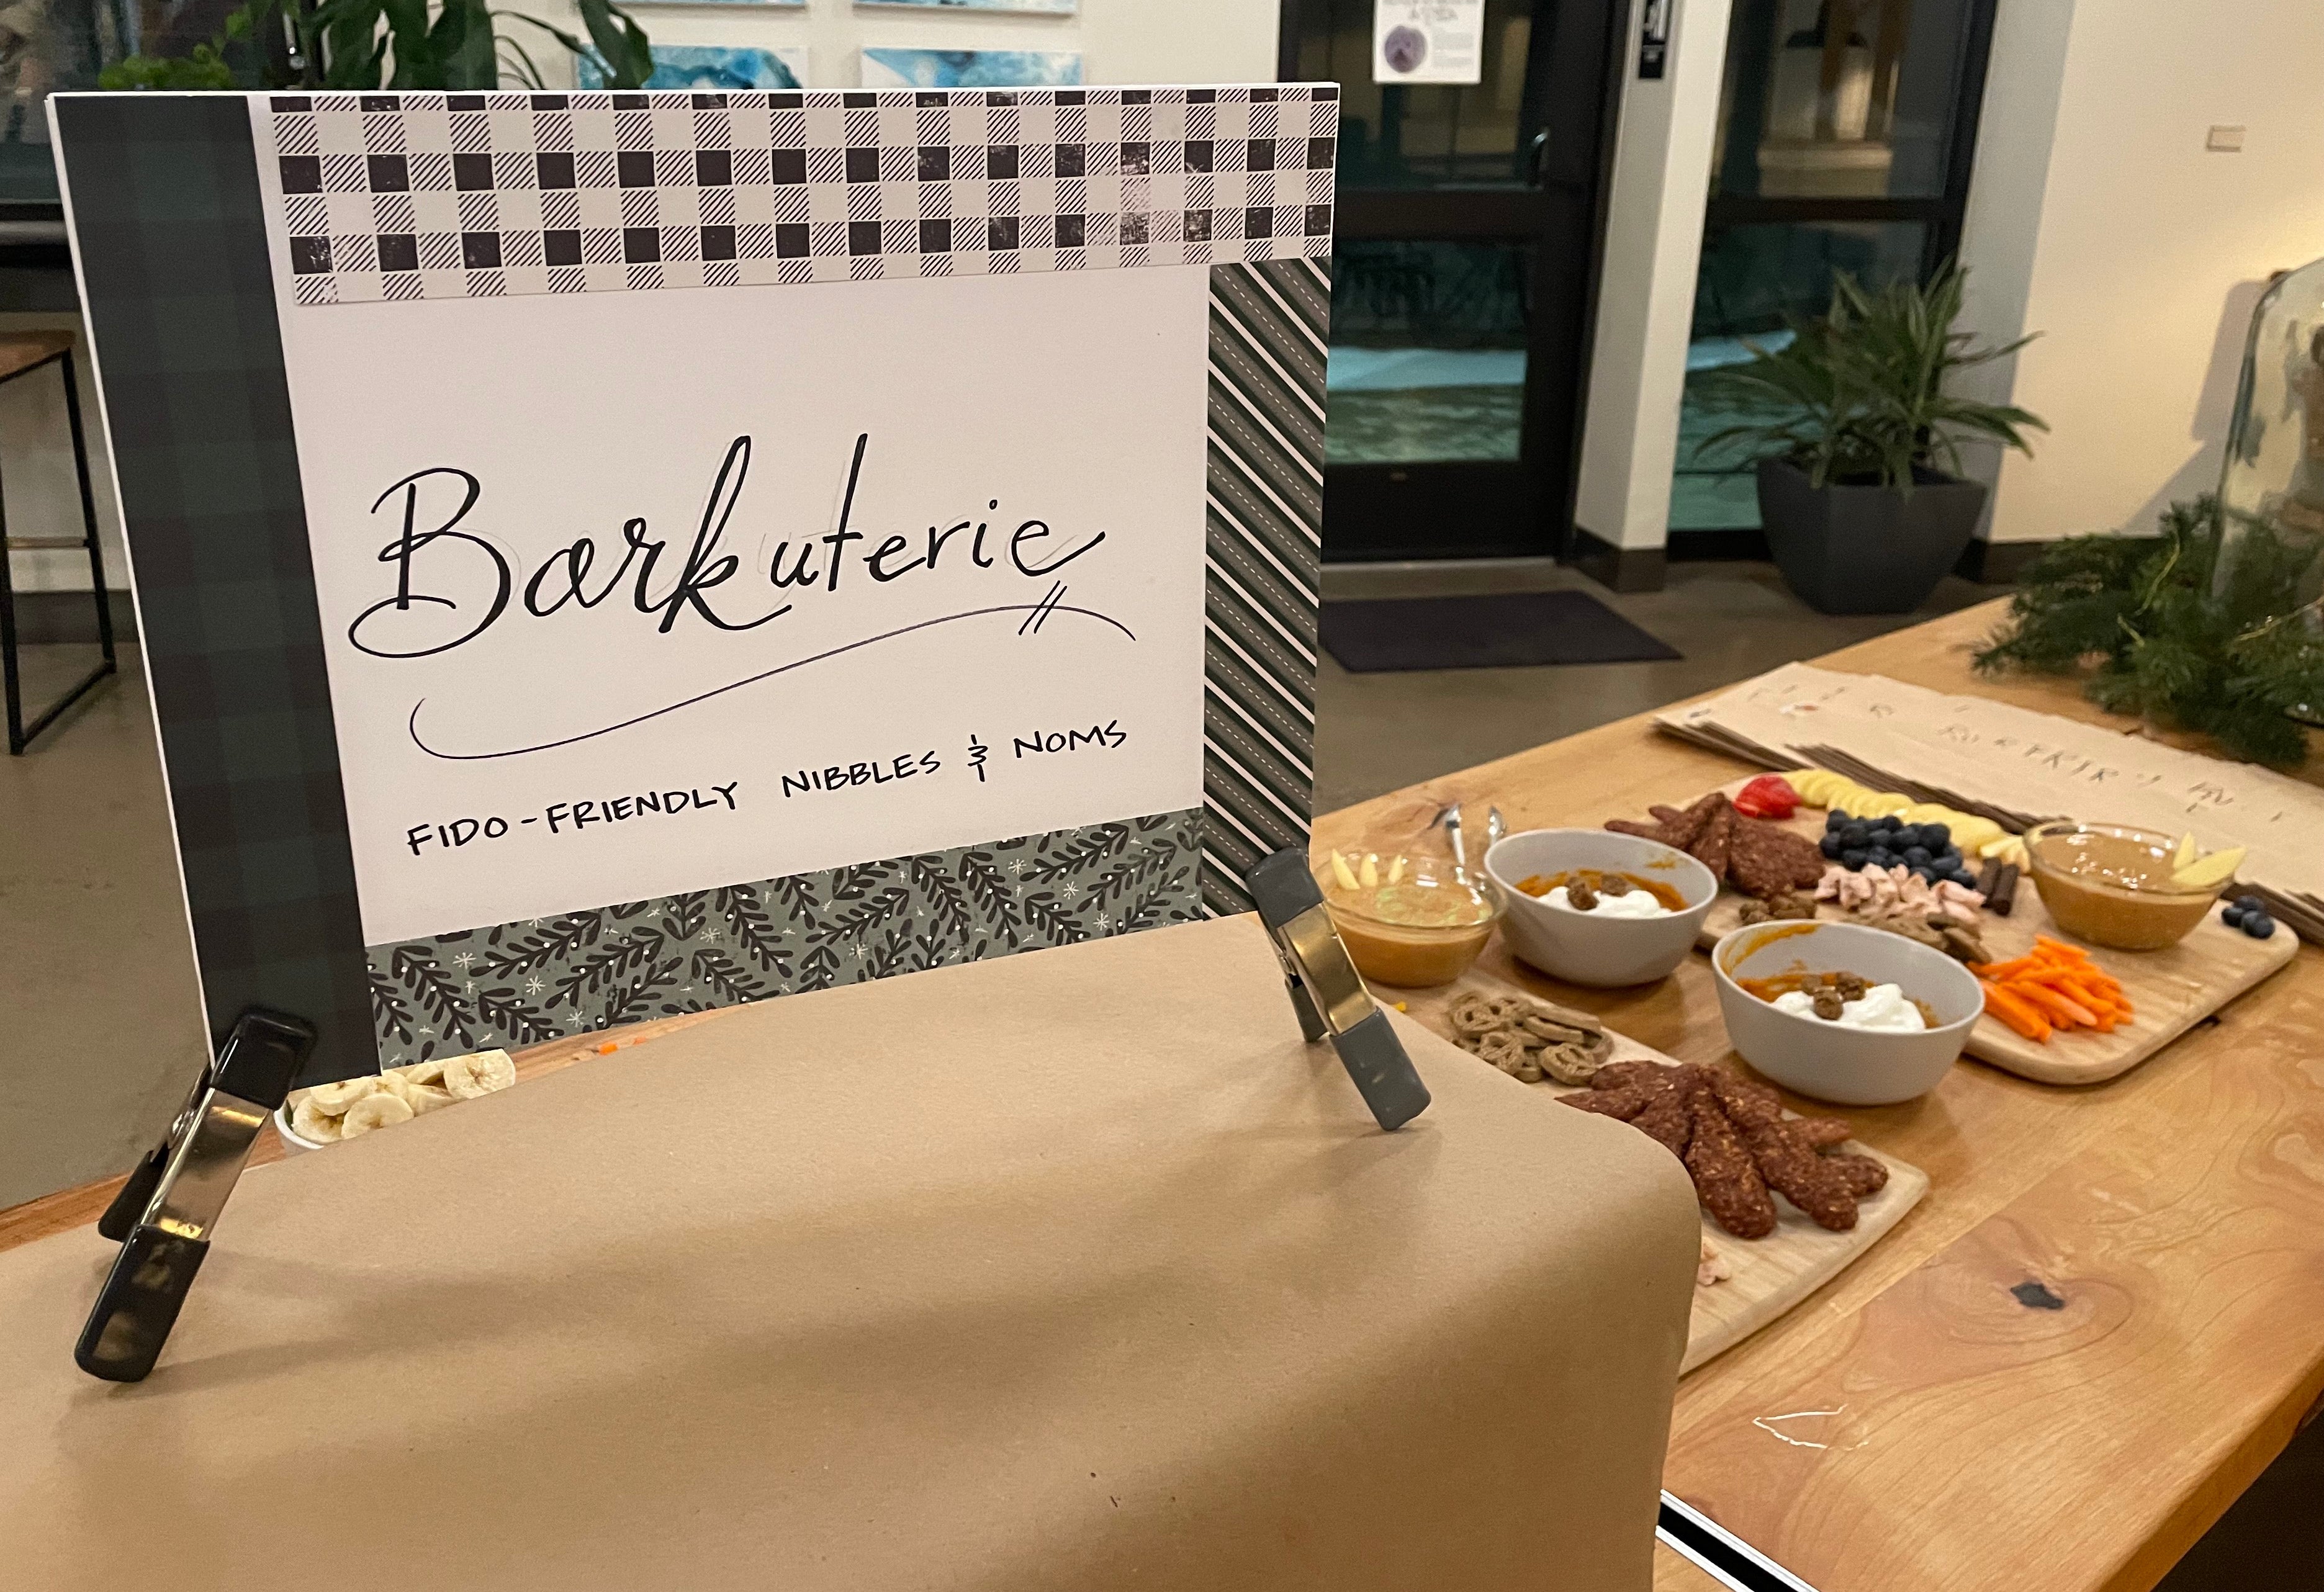 A sign saying "Barkuterie Board" and a platter of dog-friendly foods on a table.